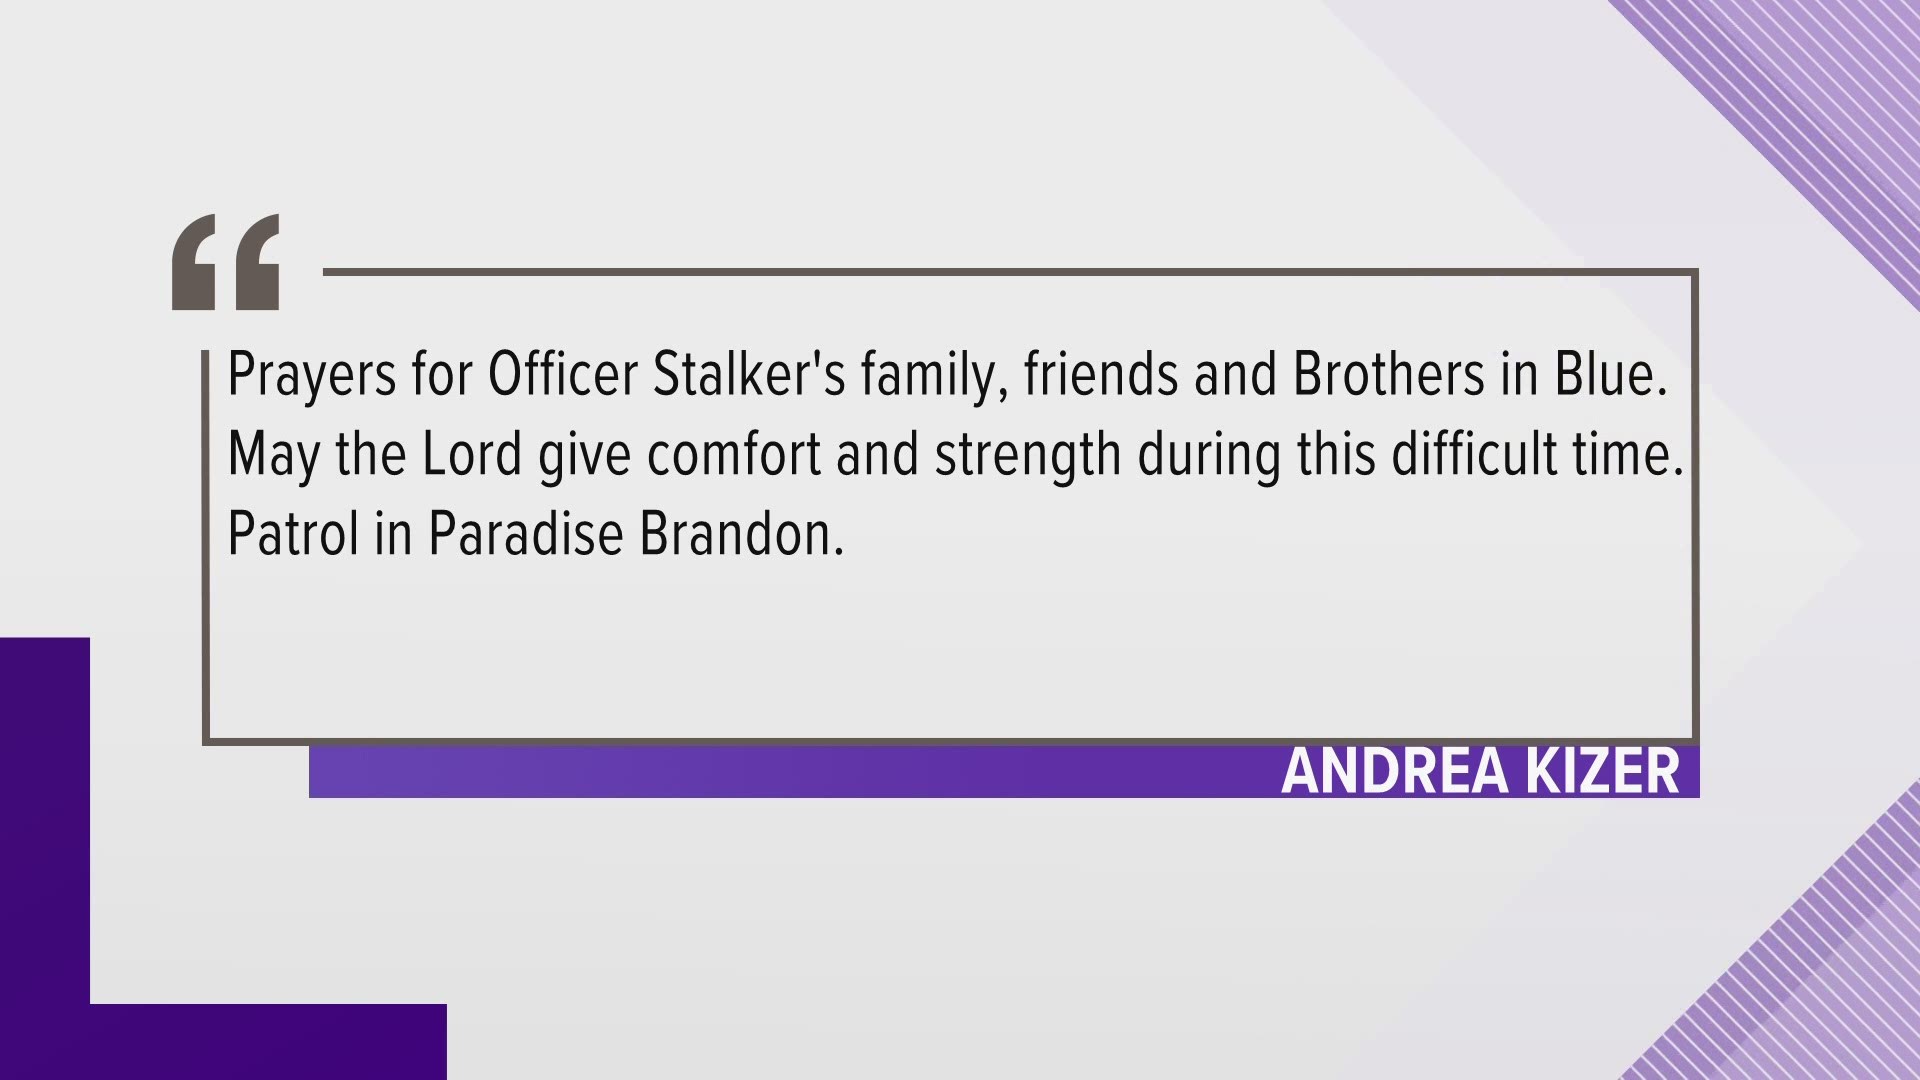 In less than a year, a second officer with the Toledo Police Department has been killed in the line of duty. Condolences poured in from our viewers after his death.